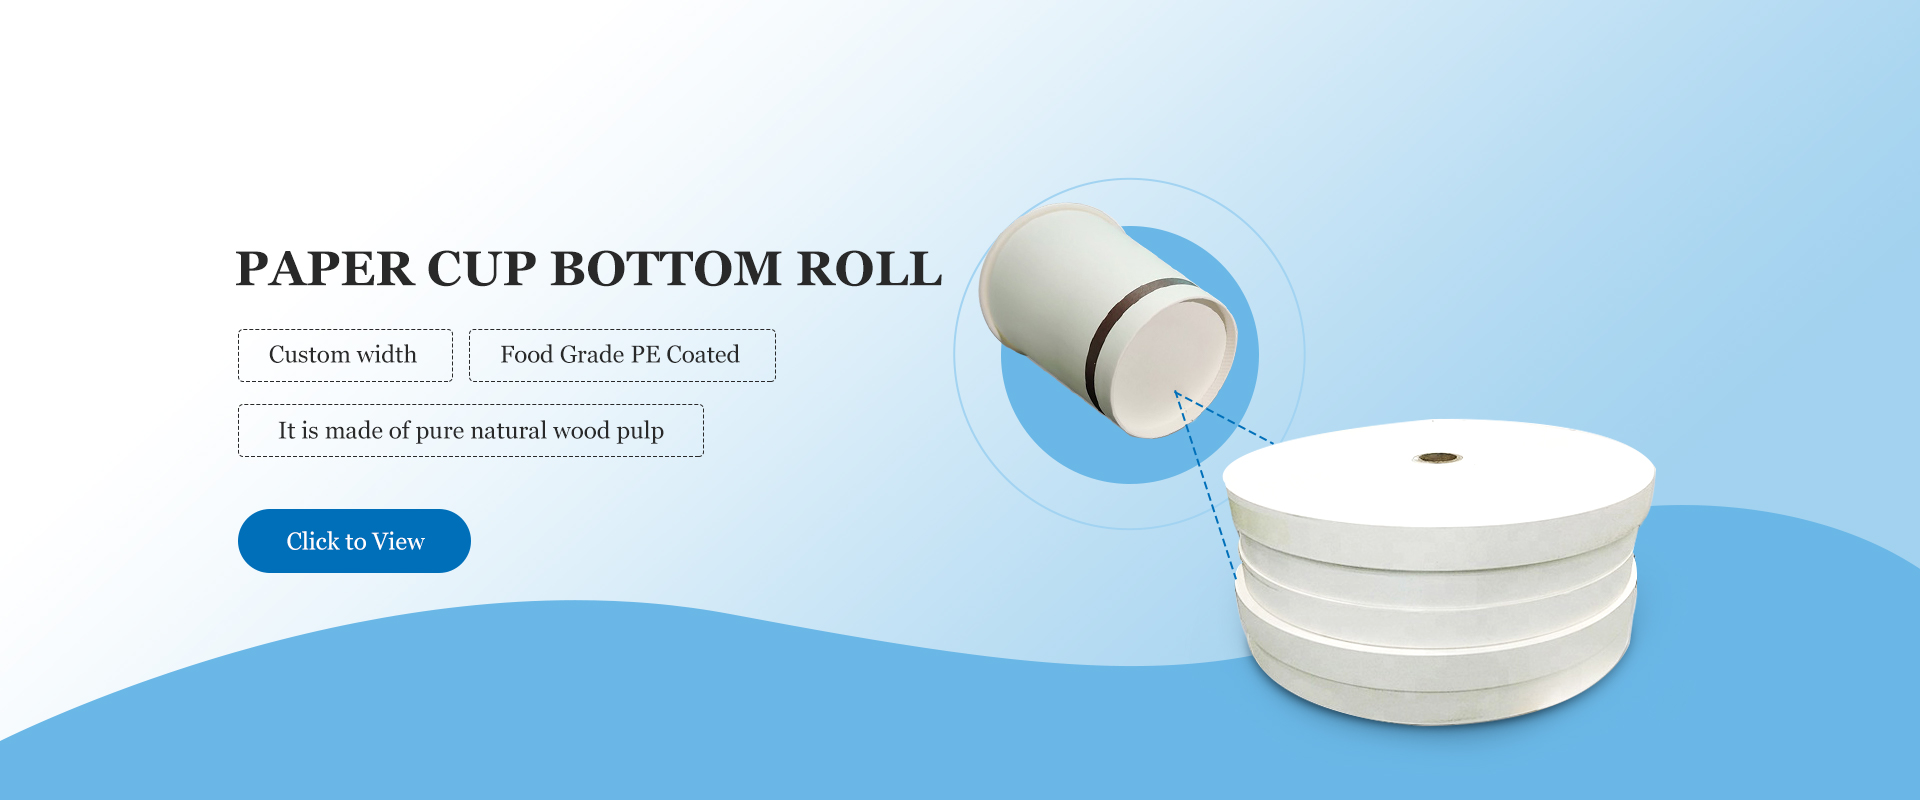 Paper Cup Bottom Roll